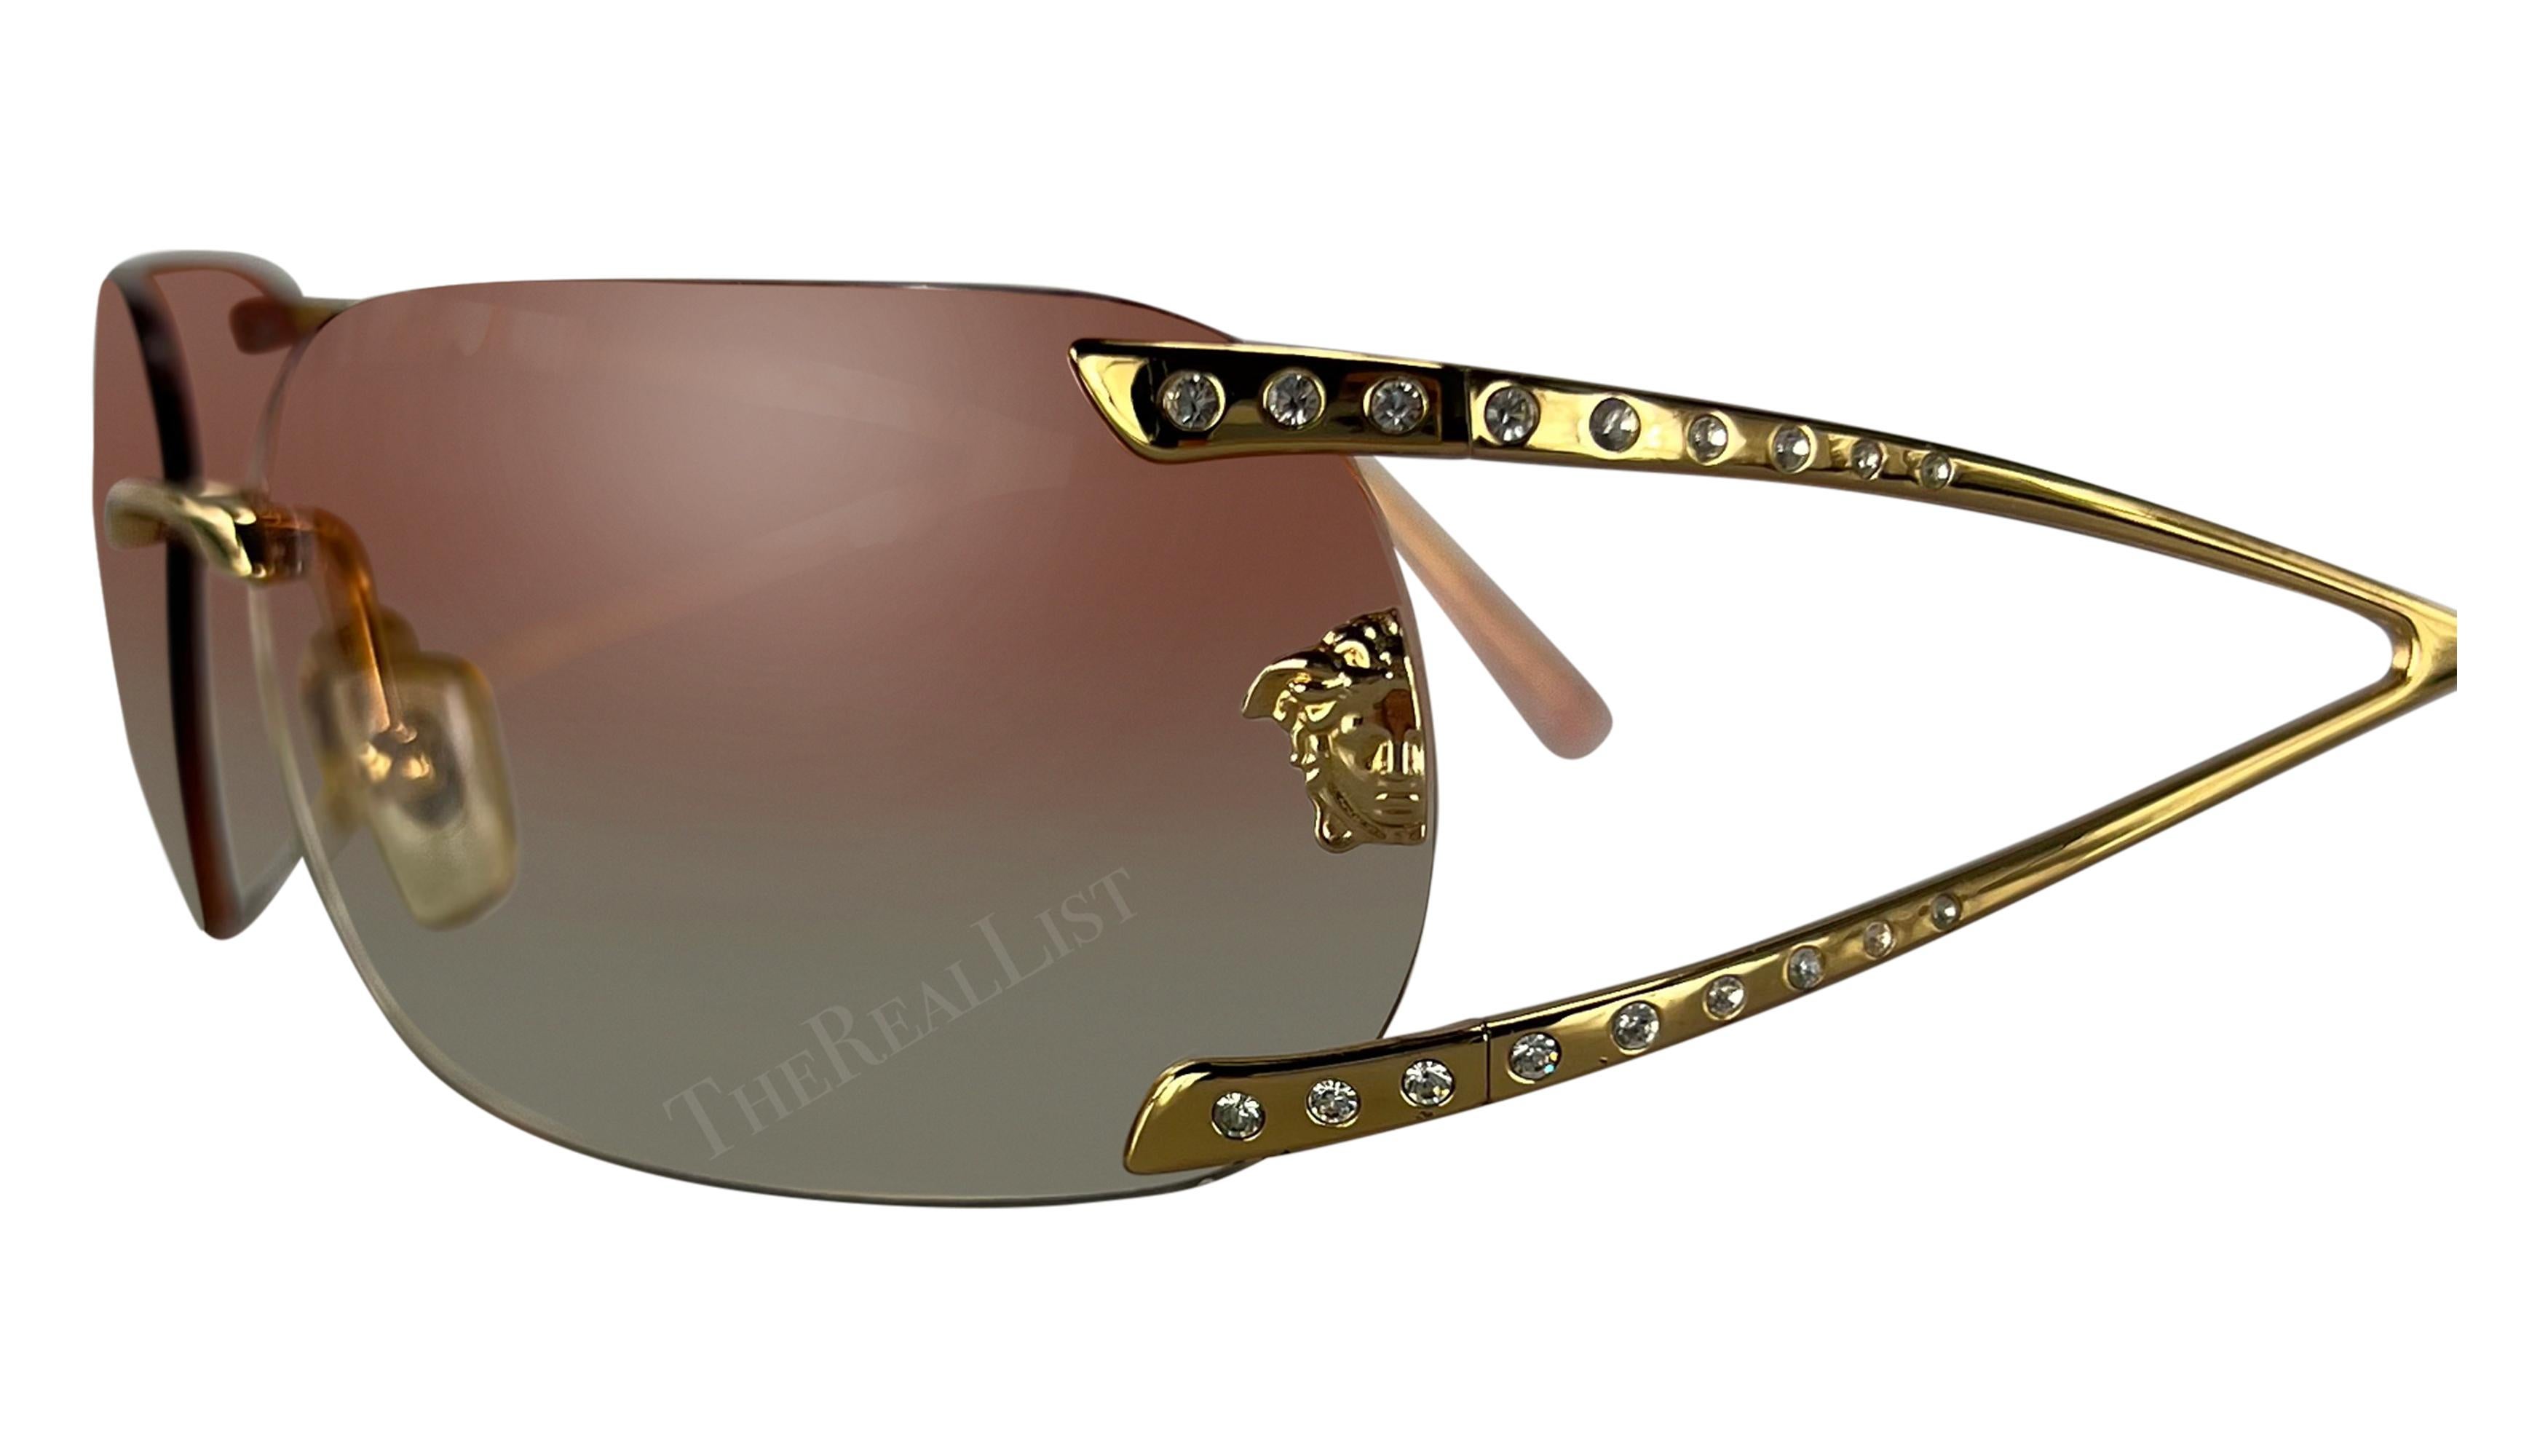 From the early 2000s, these oversized Versace rimless sunglasses, designed by Donatella Versace, feature pink ombre lenses and rhinestone accented gold-tone arms and are made complete with a Versace Medusa logo on one lens. Add these fabulous Y2K